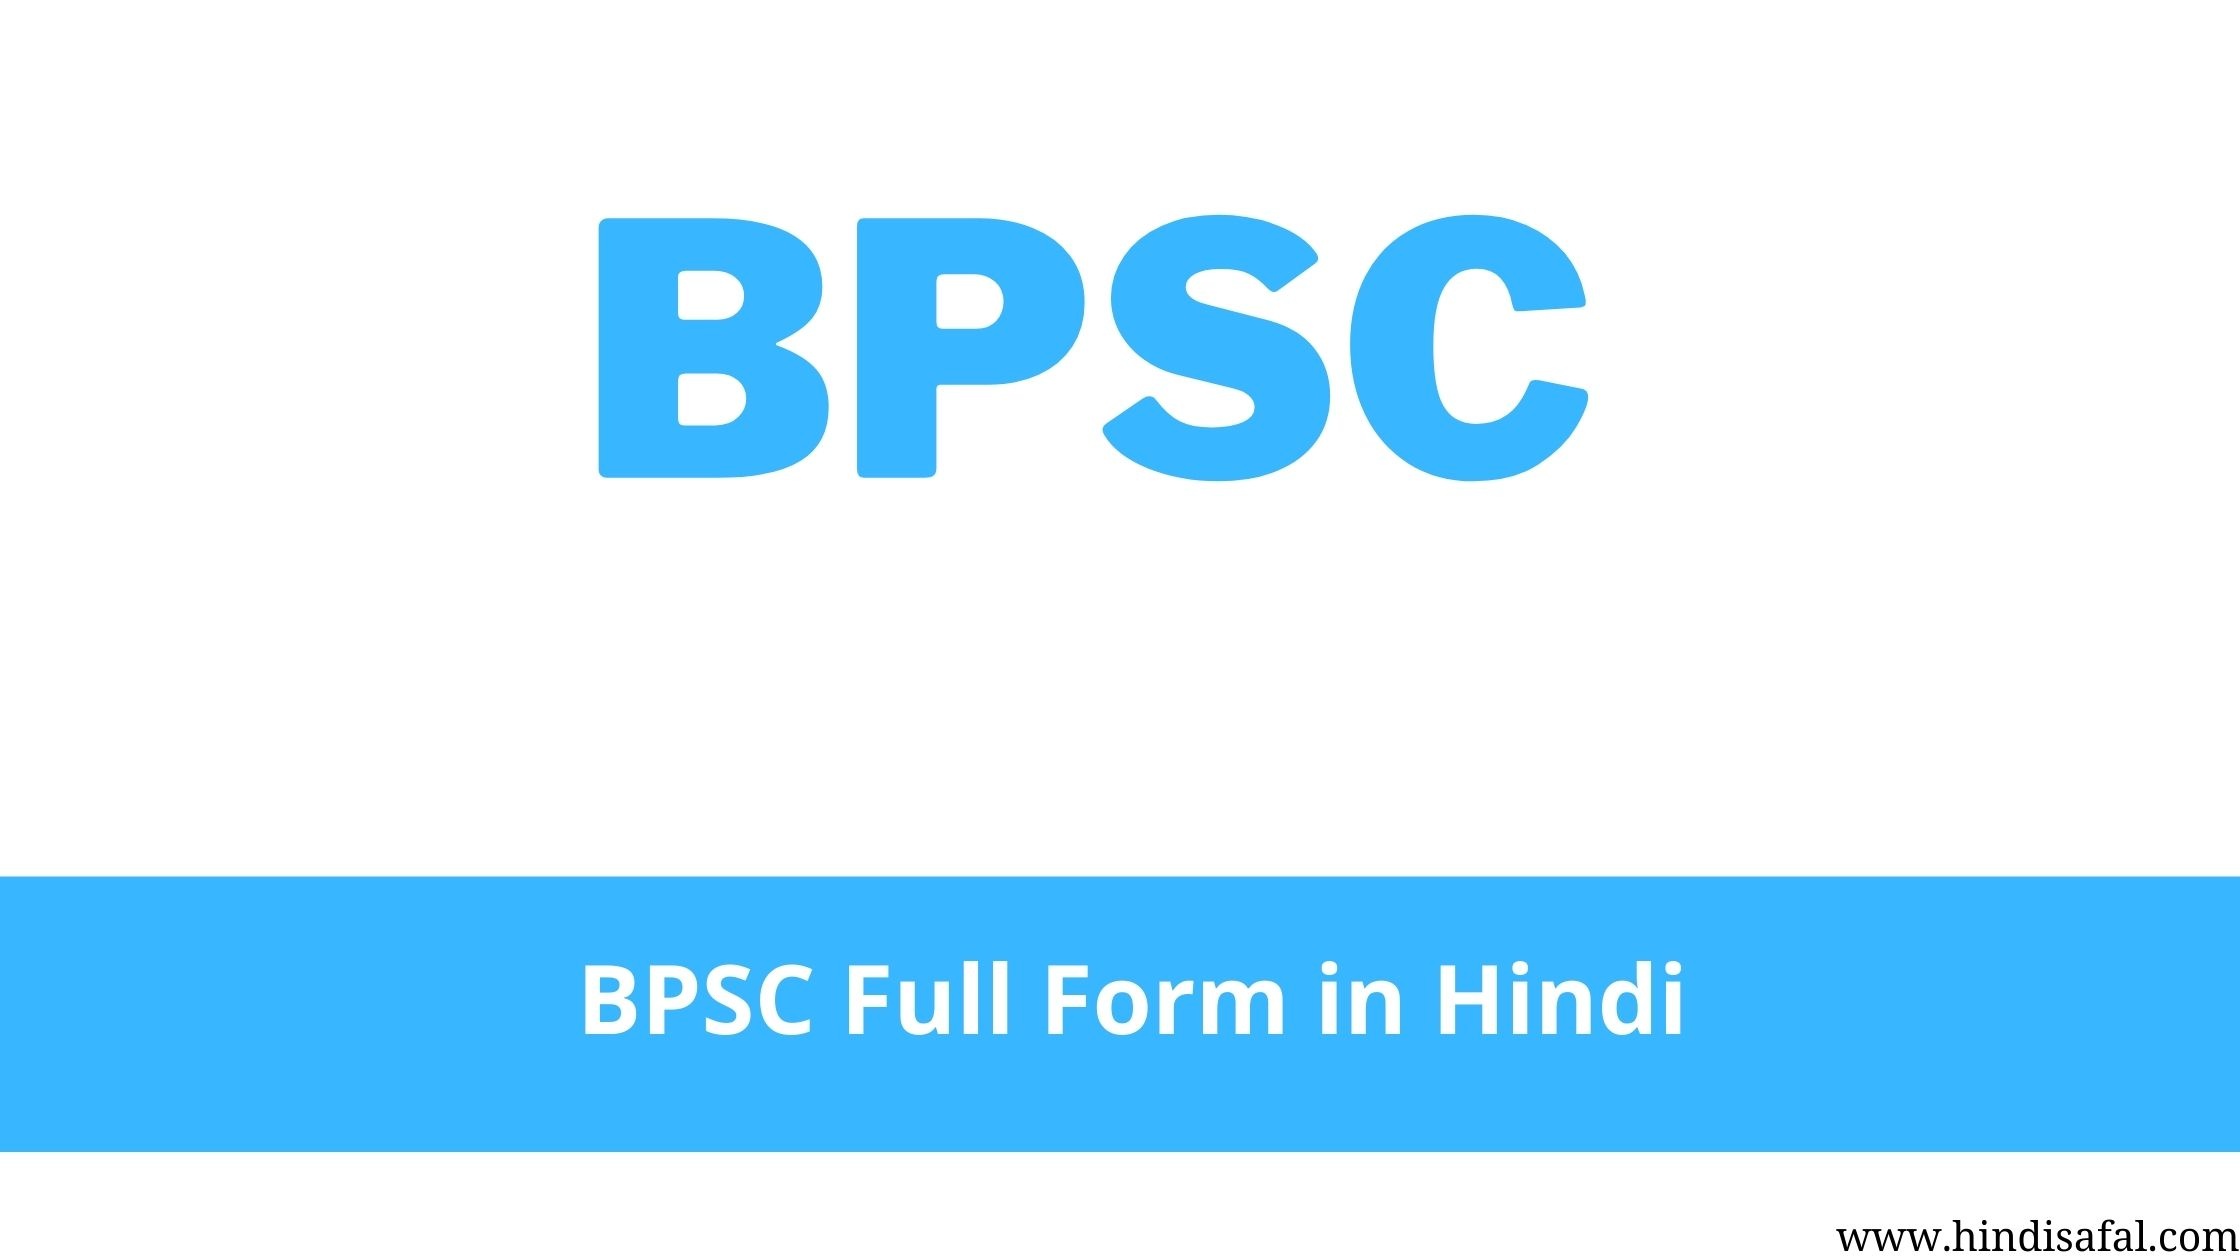 BPSC Full Form in Hindi